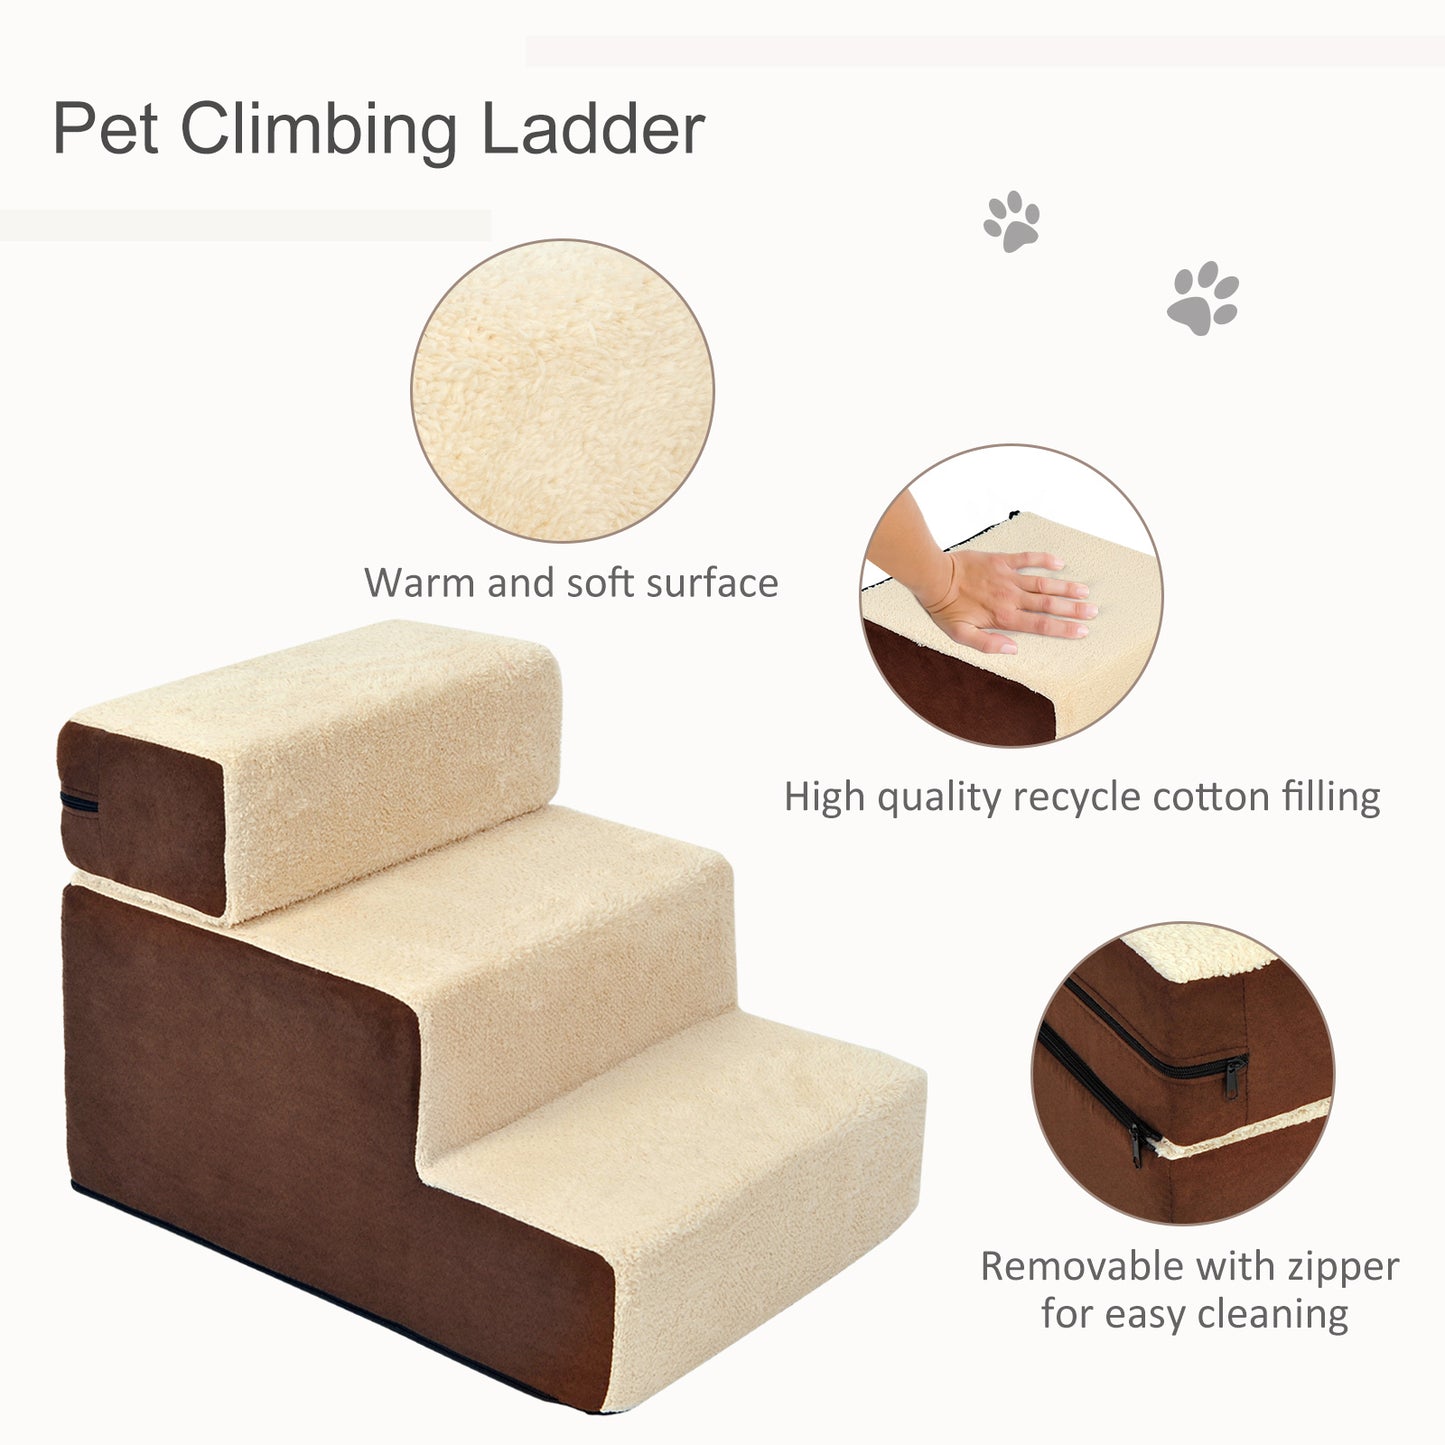 PawHut Domestic Pets Deluxe Sponge 3-Step Dog Steps Staircase w/Soft Pad Beige